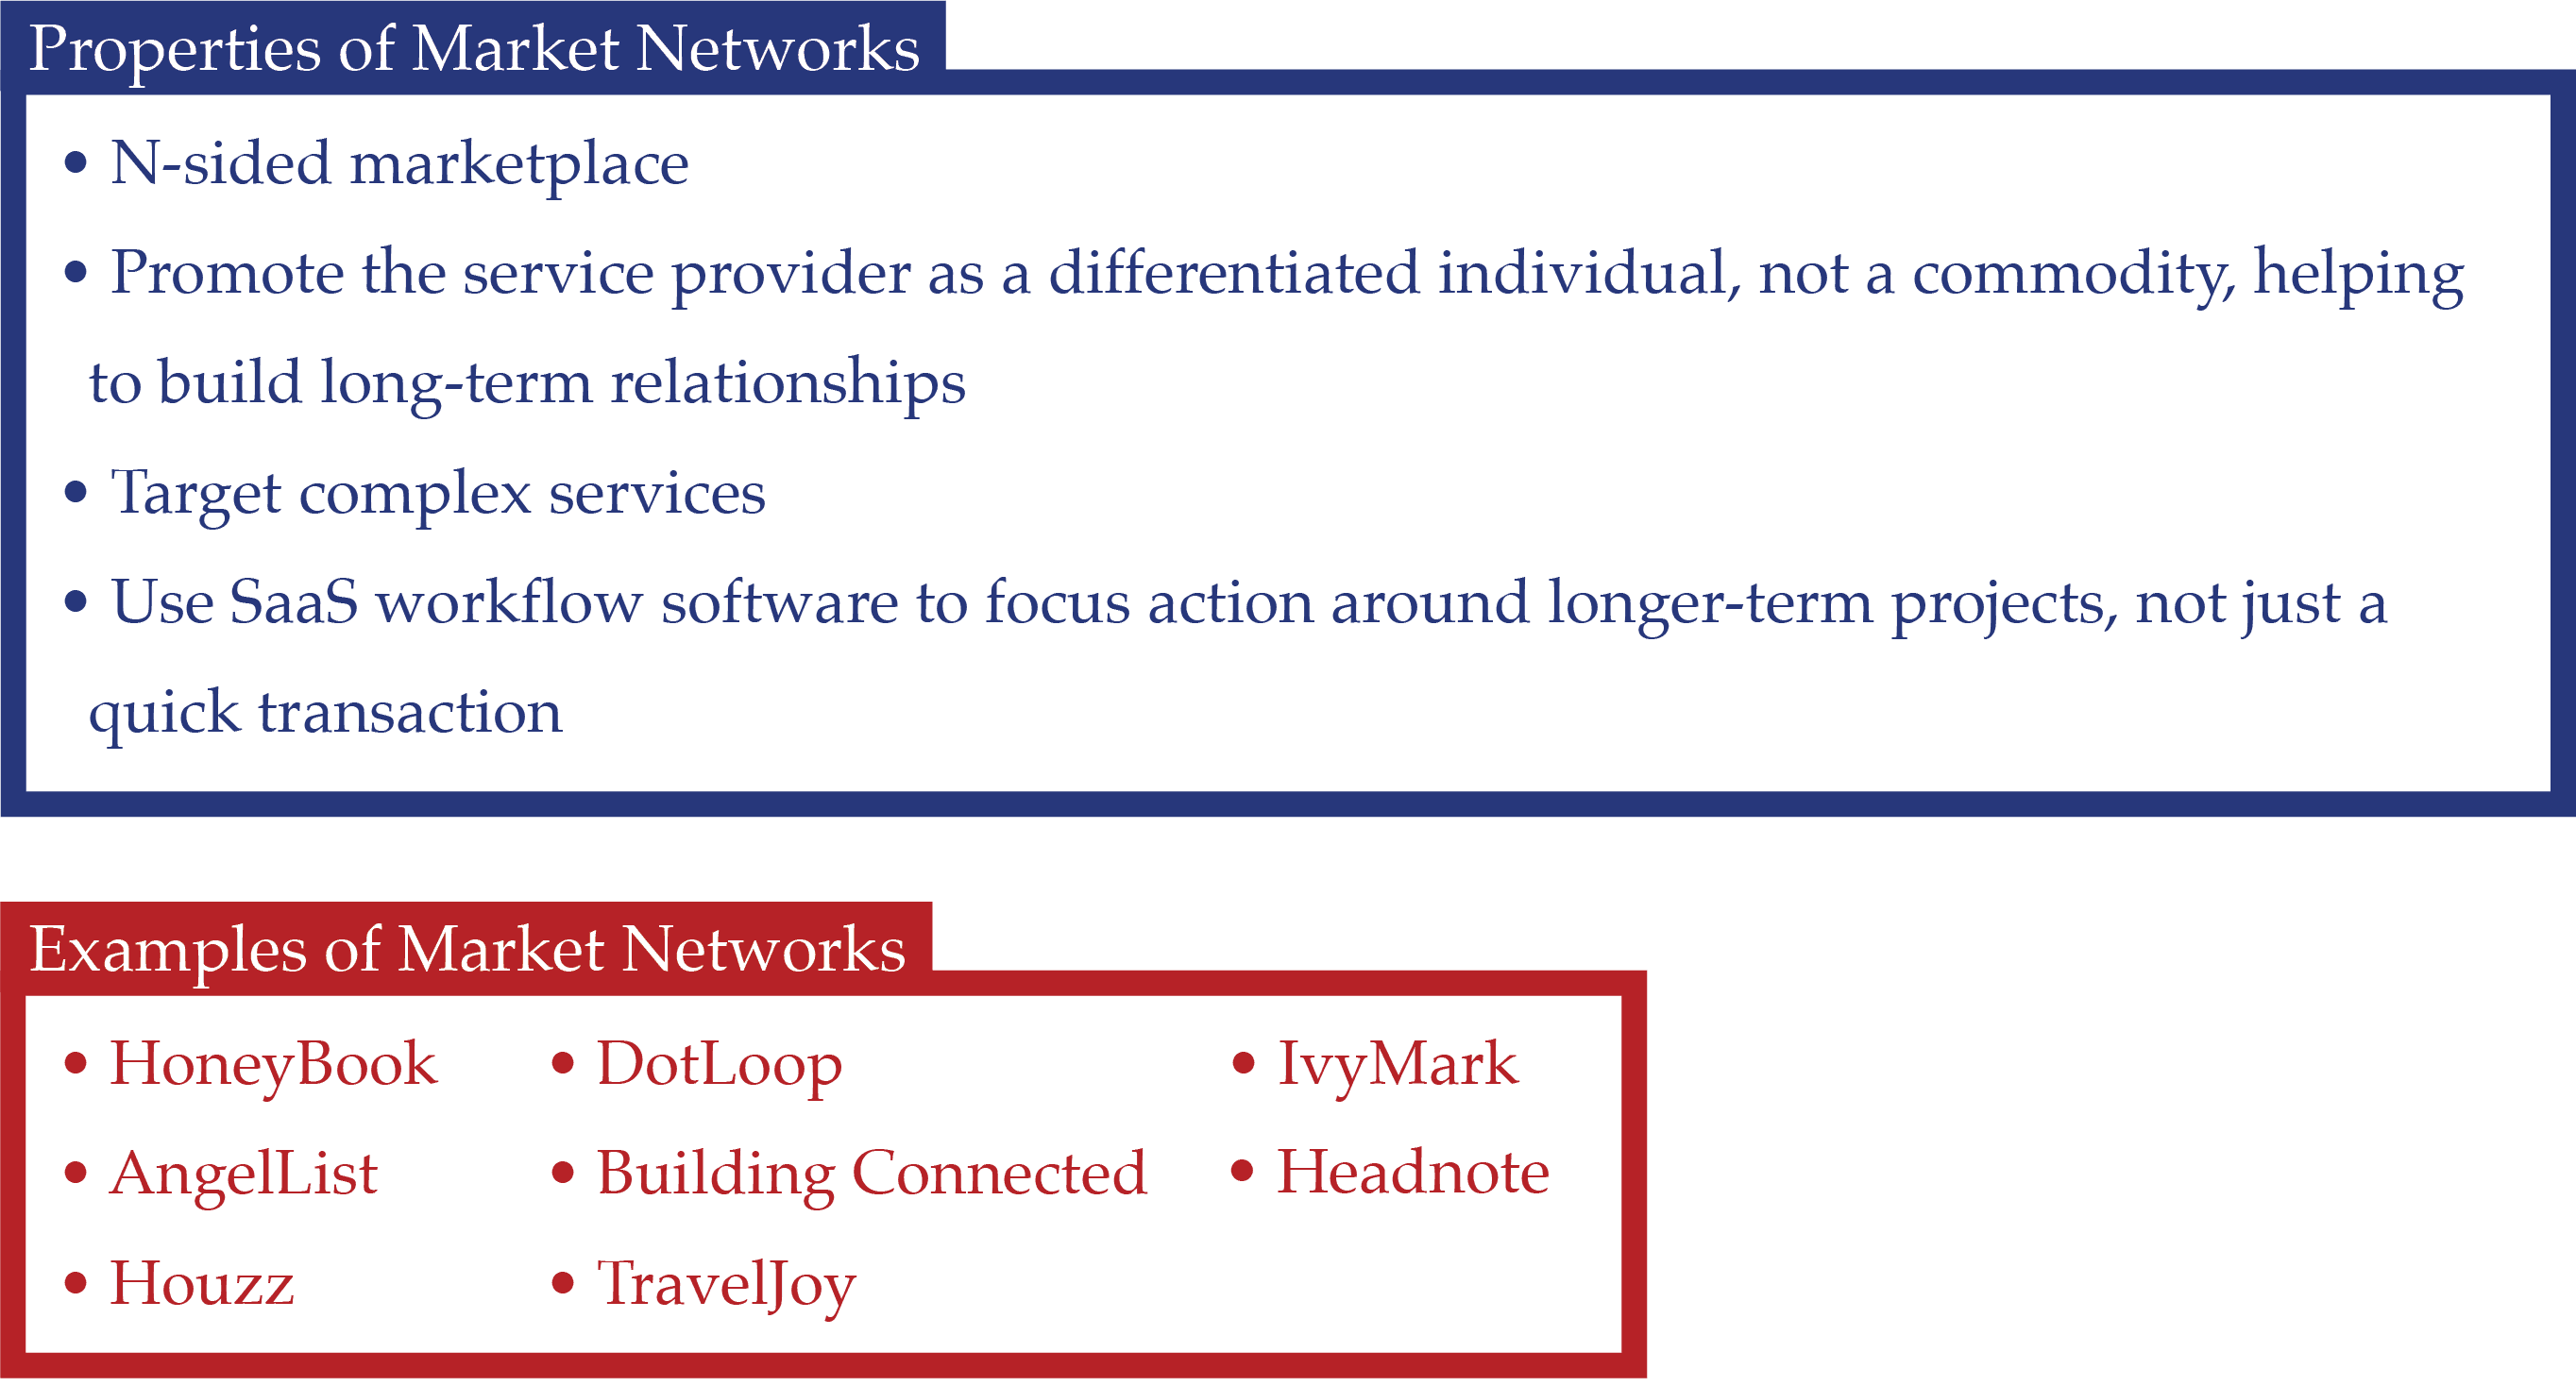 Properties and Example of Market Networks